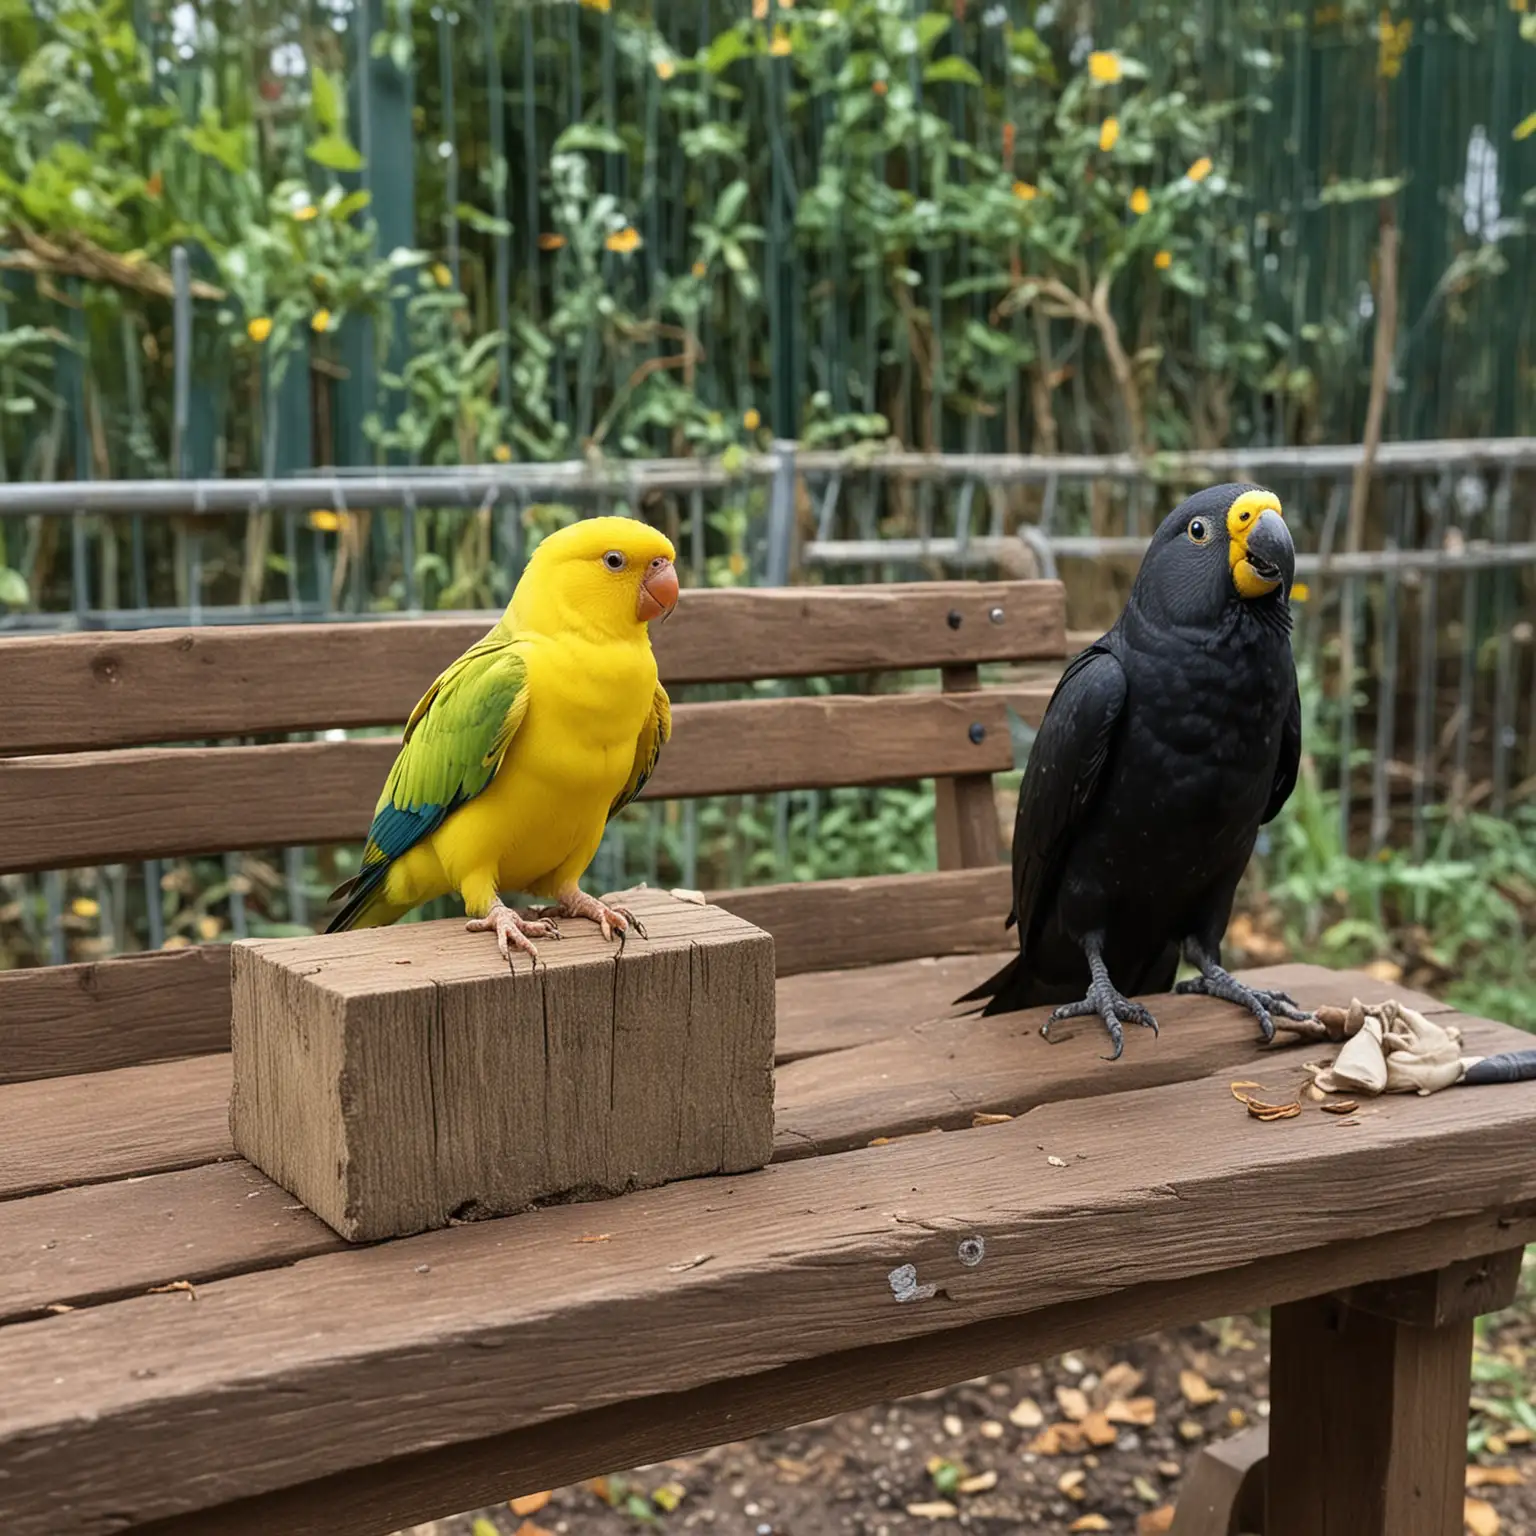 Bench Scene with Cat Crow and Yellow Parakeet